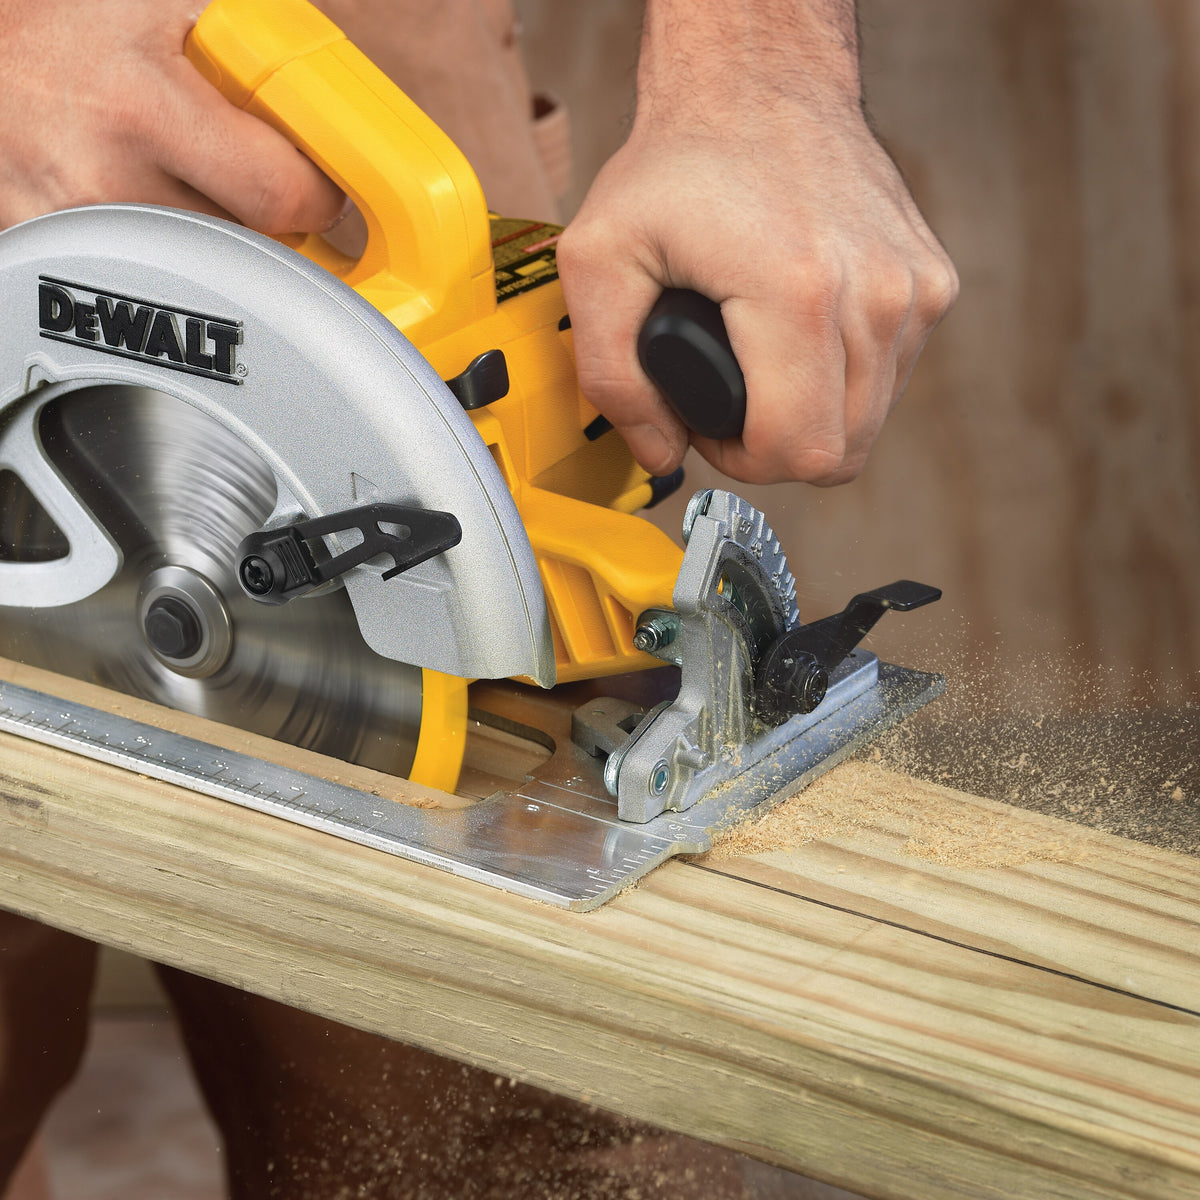 DEWALT 4-1/2 Small Angle Grinder With One-Touch Guard DWE4011 - JMP Wood